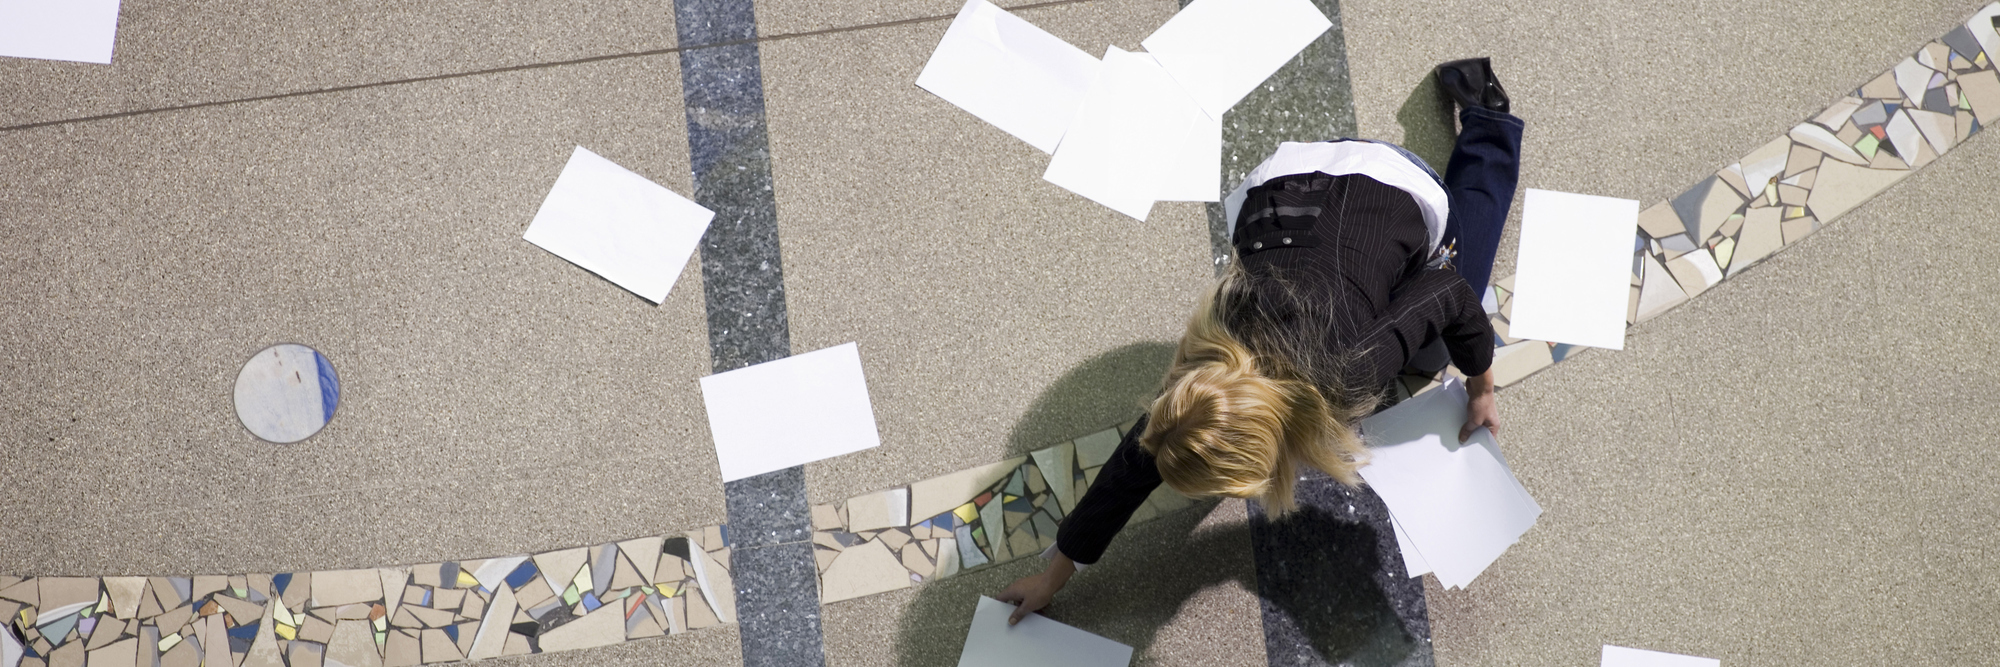 overhead view of blonde business woman in hall picking up scattered papers